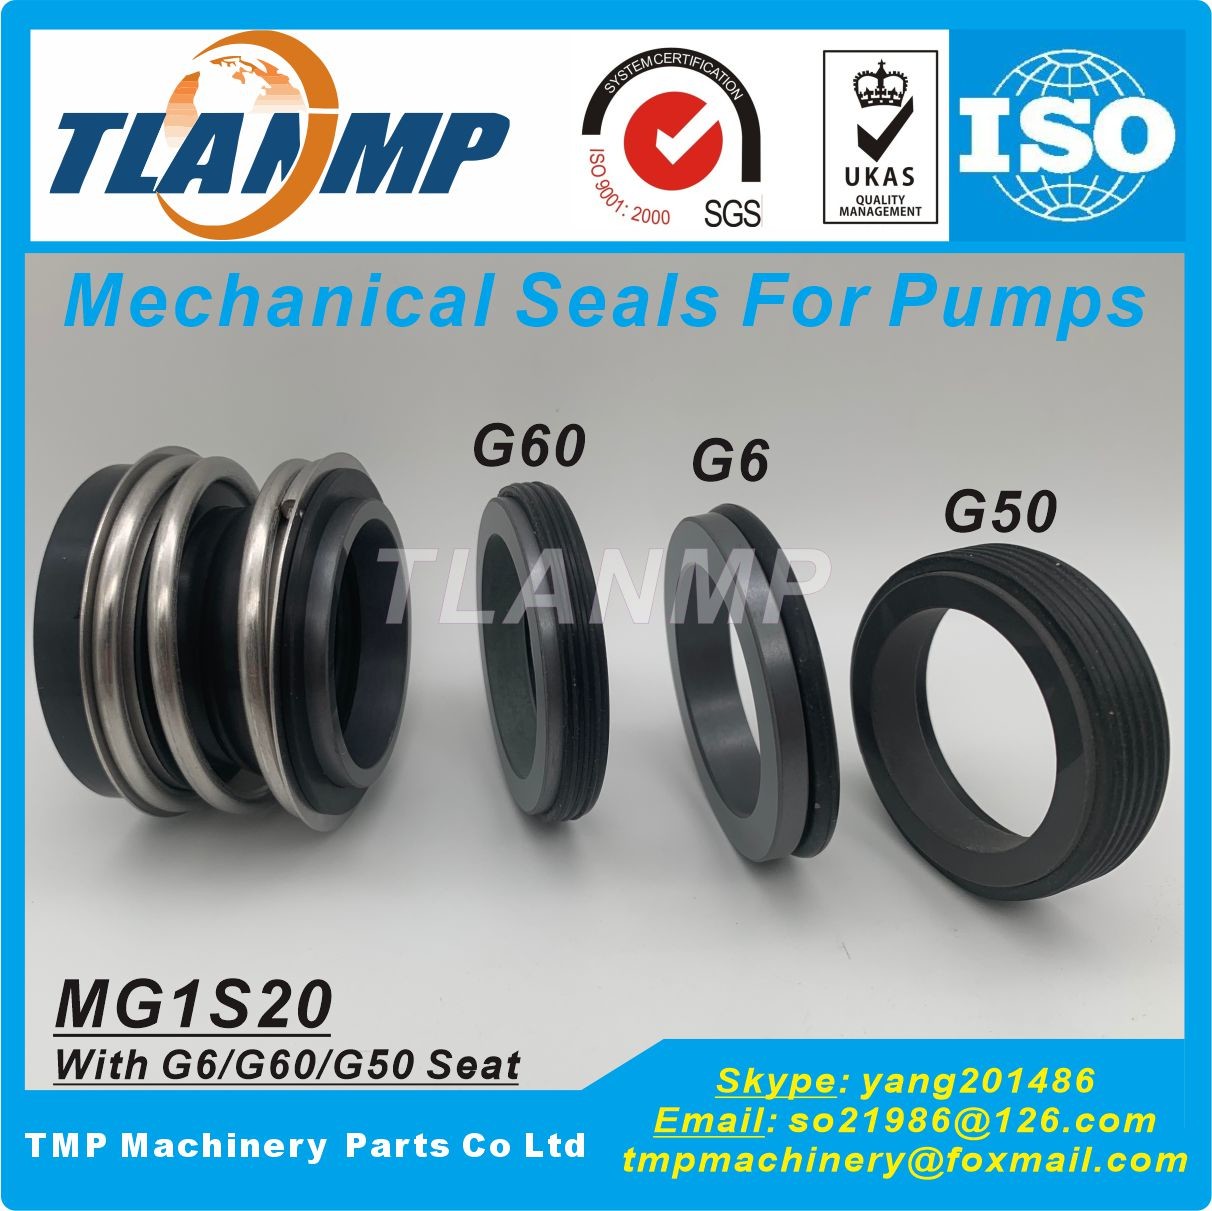 MG1S20/25-G60 , MG1S20/25-G6 , MG1S20/25-G50 , MG1S20-25 Burgmann Mechanical Seals (Rotary Working Length: L1=25mm)